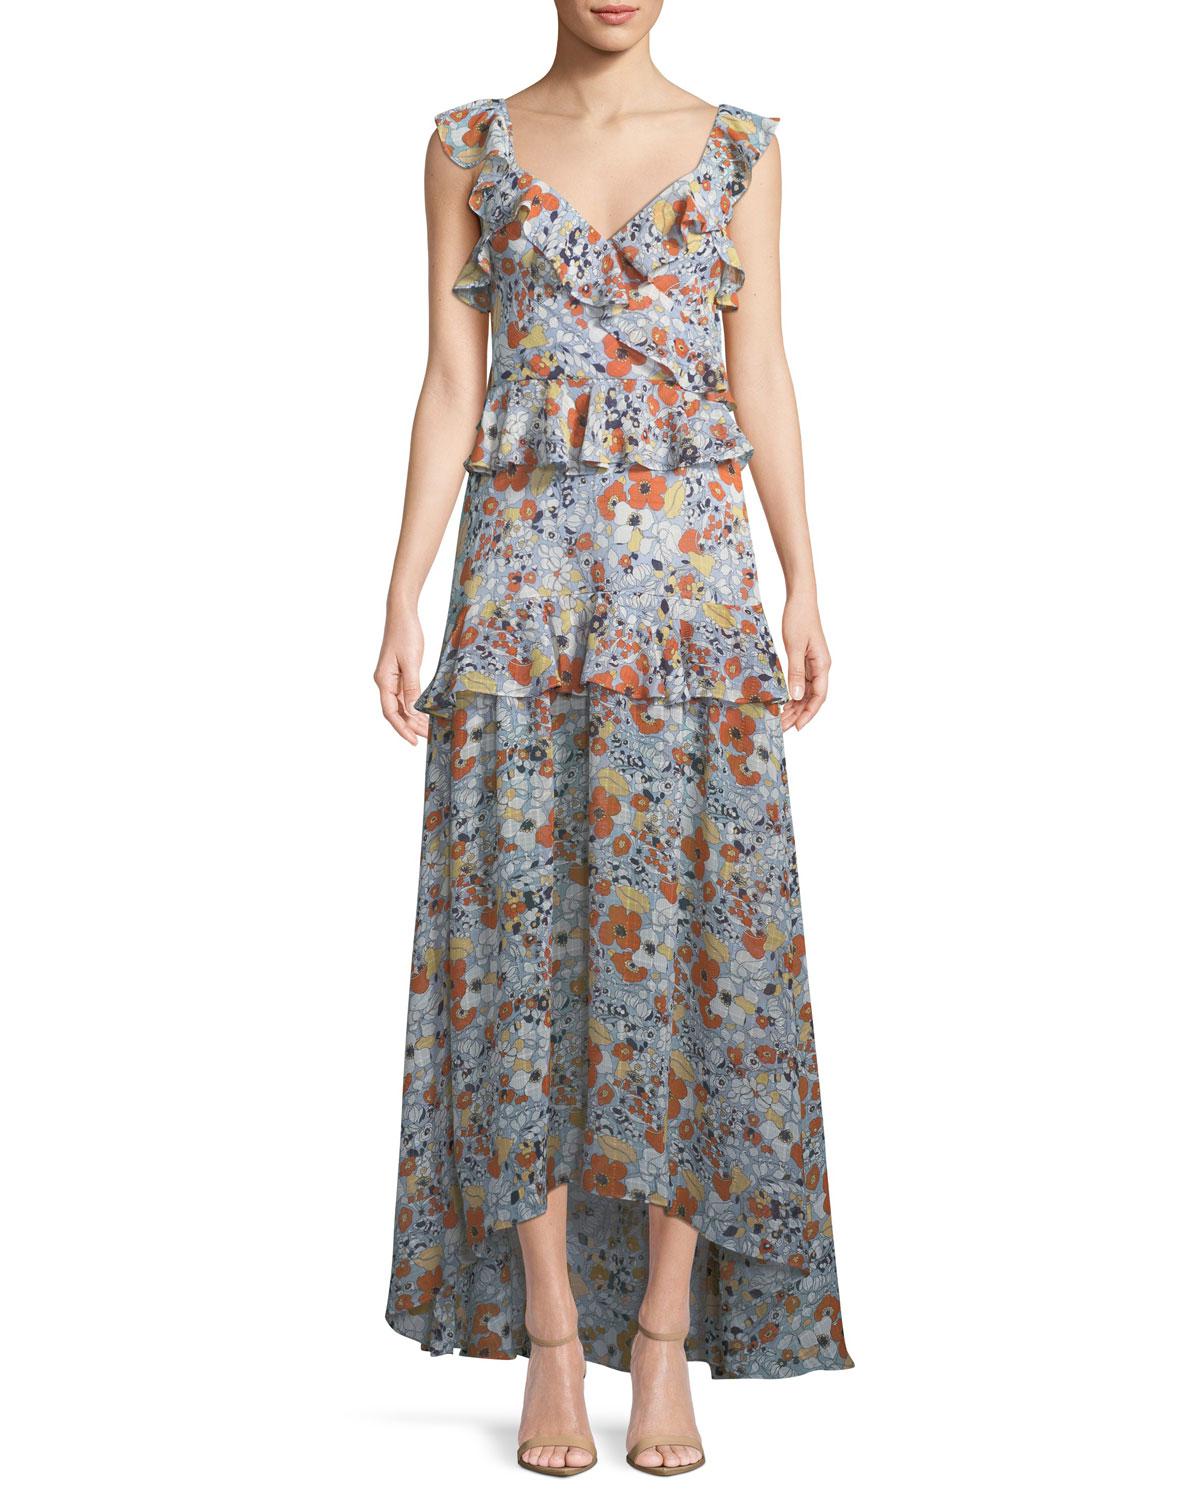 Alexis Jewell Floral Ruffle Maxi Dress in Orange - Lyst